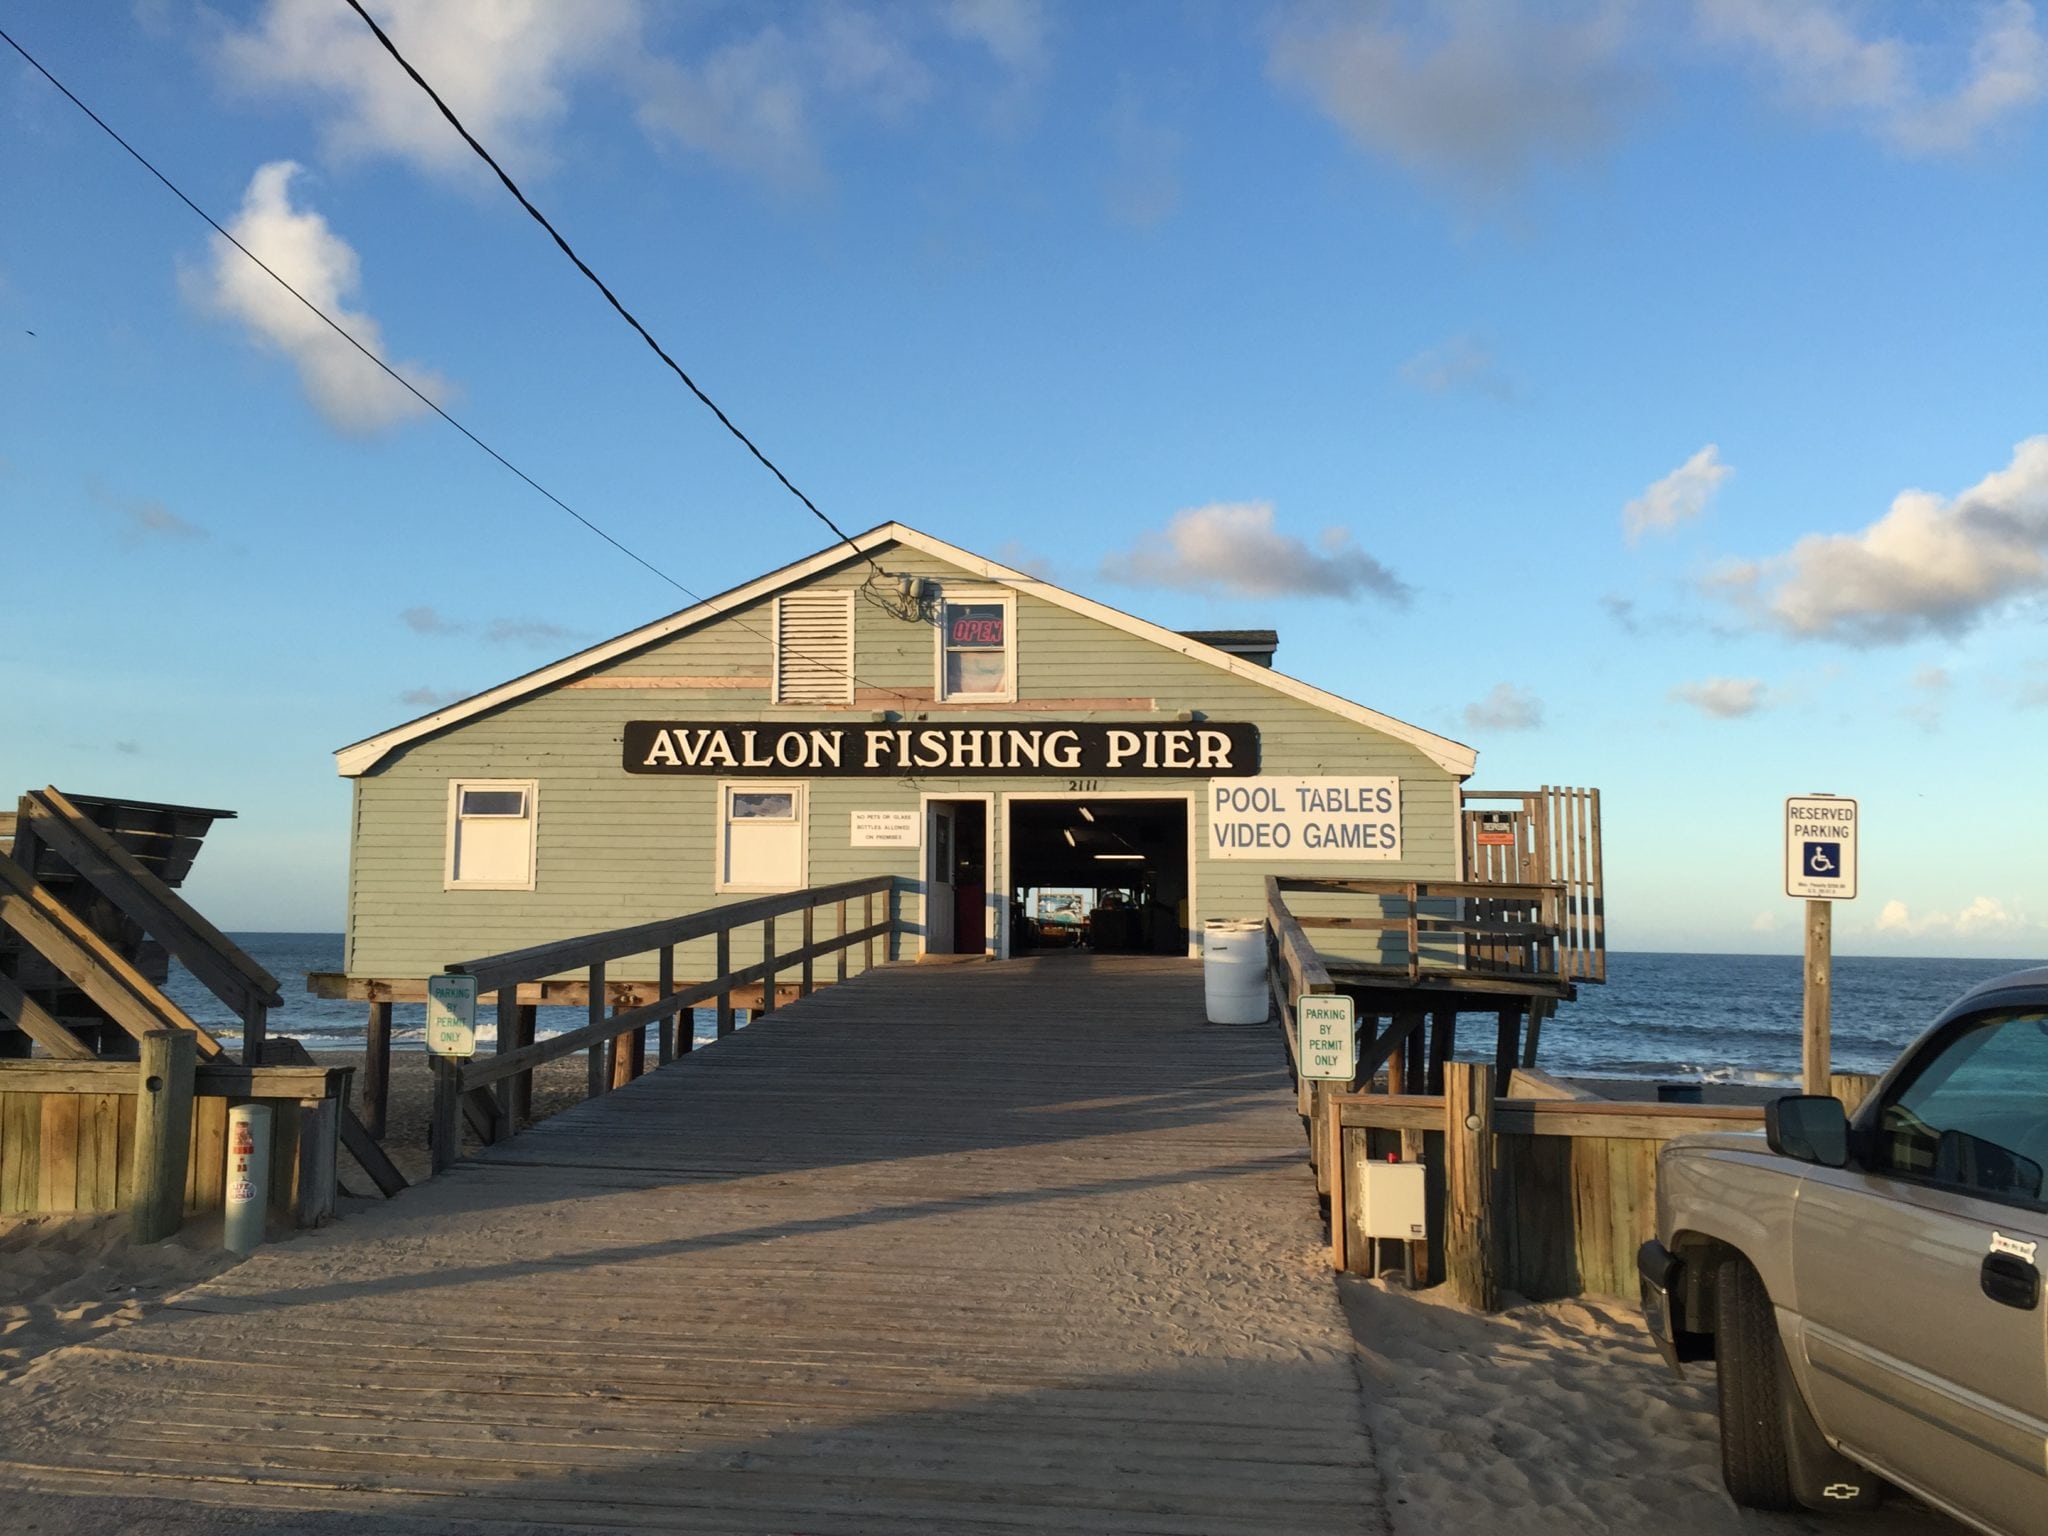 Outer Banks The Avalon Fishing Pier is a great place to see what the locals are catching, play some arcade games, enjoy a beer and stunning views of the beach. 